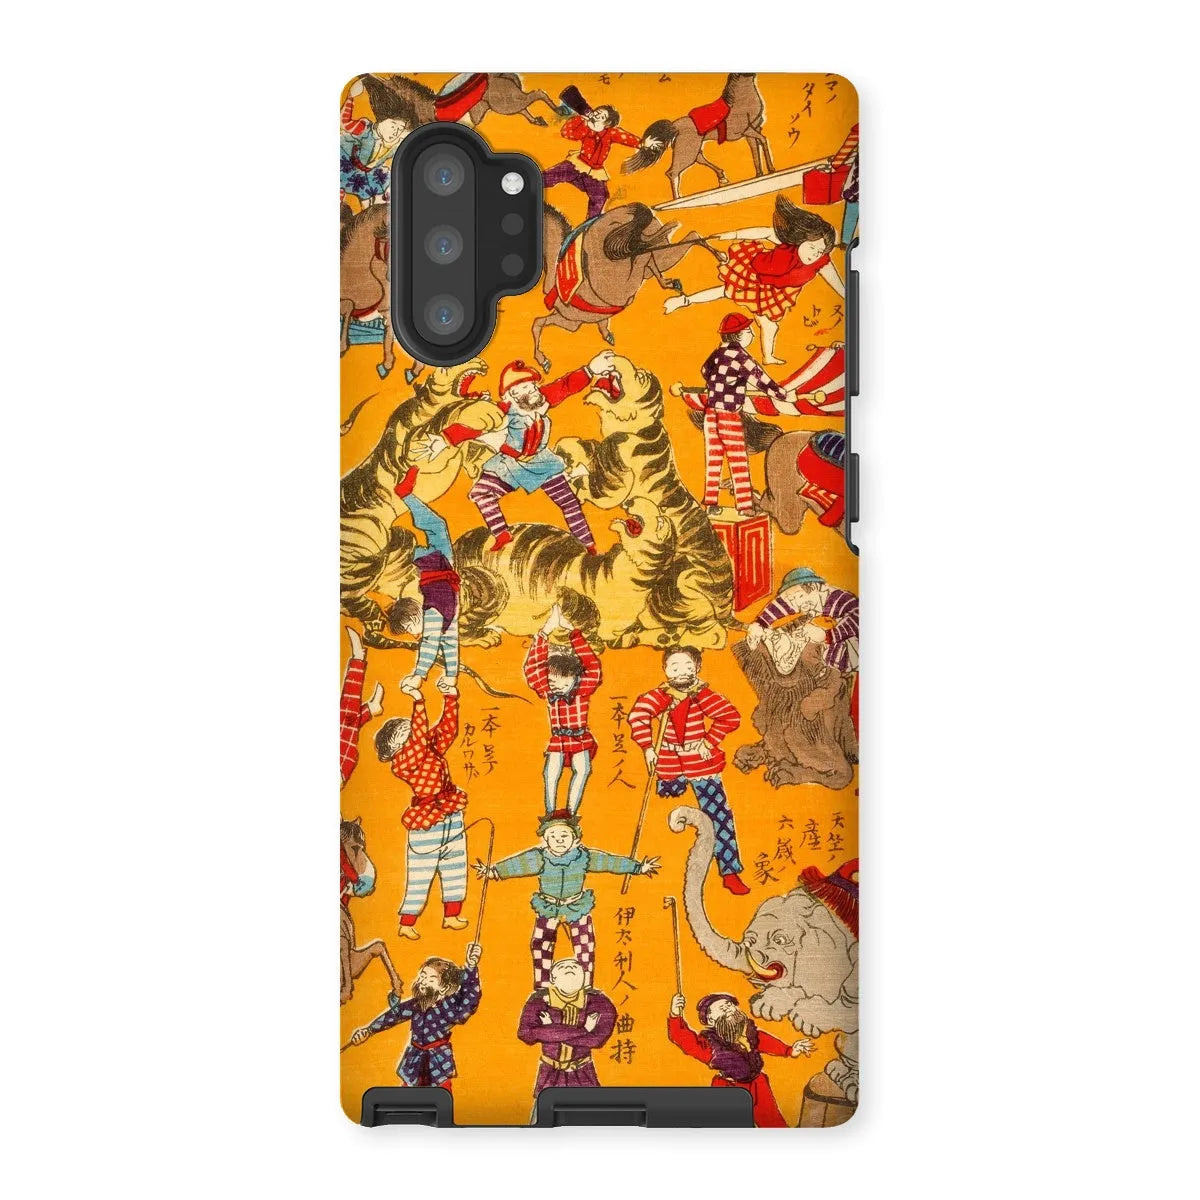 Japanese Circus Aesthetic Art Phone Case - Samsung Galaxy Note 10p / Matte - Mobile Phone Cases - Aesthetic Art